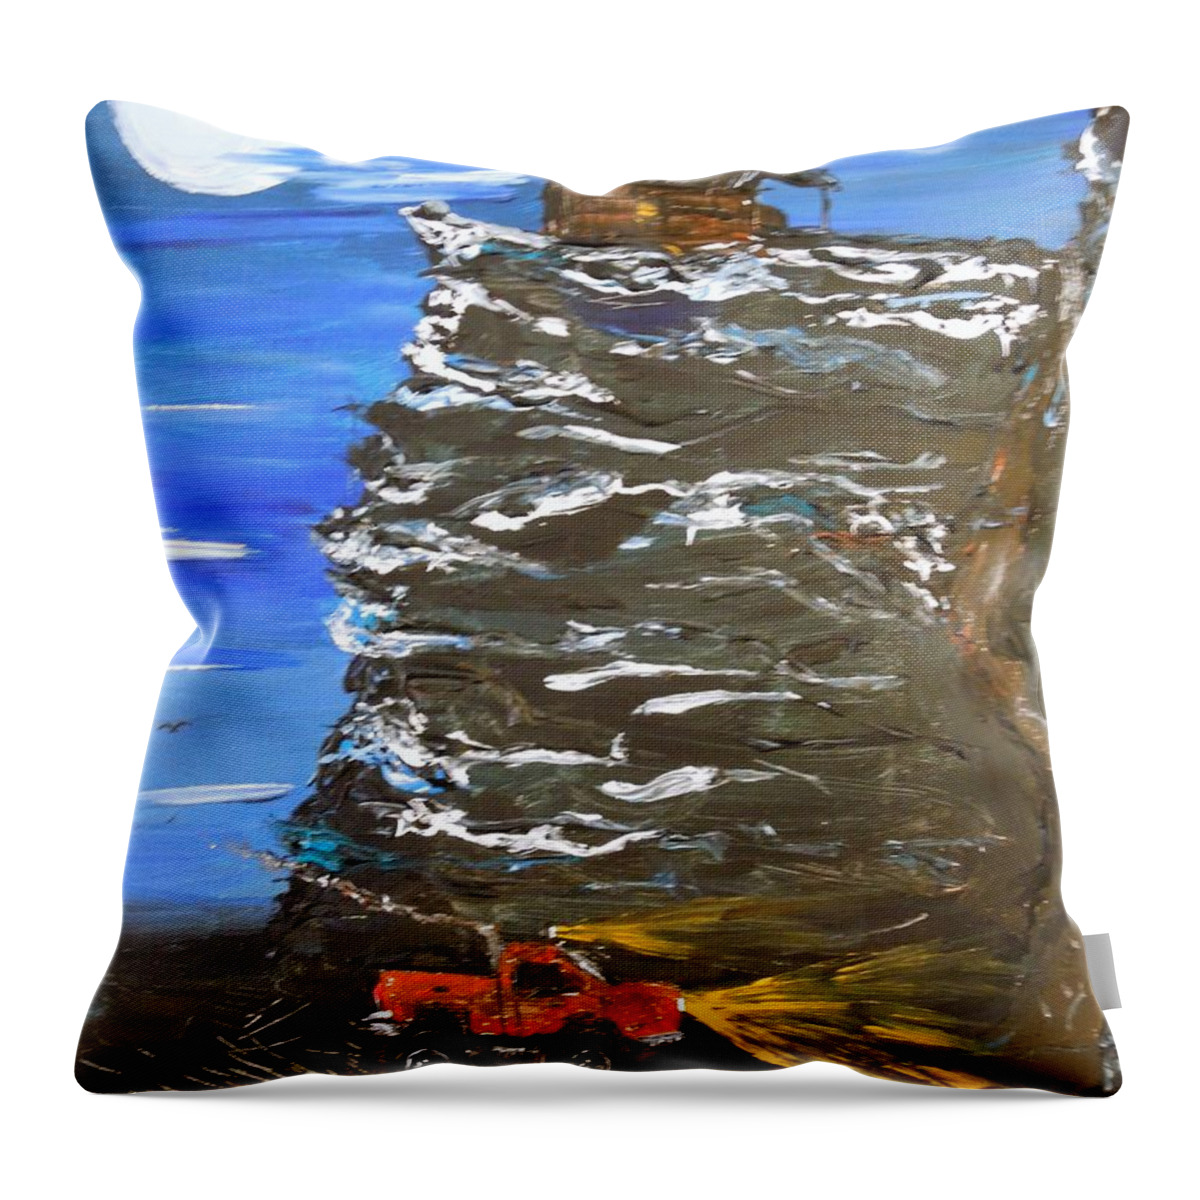 Shack Throw Pillow featuring the painting Night Shack by Randolph Gatling